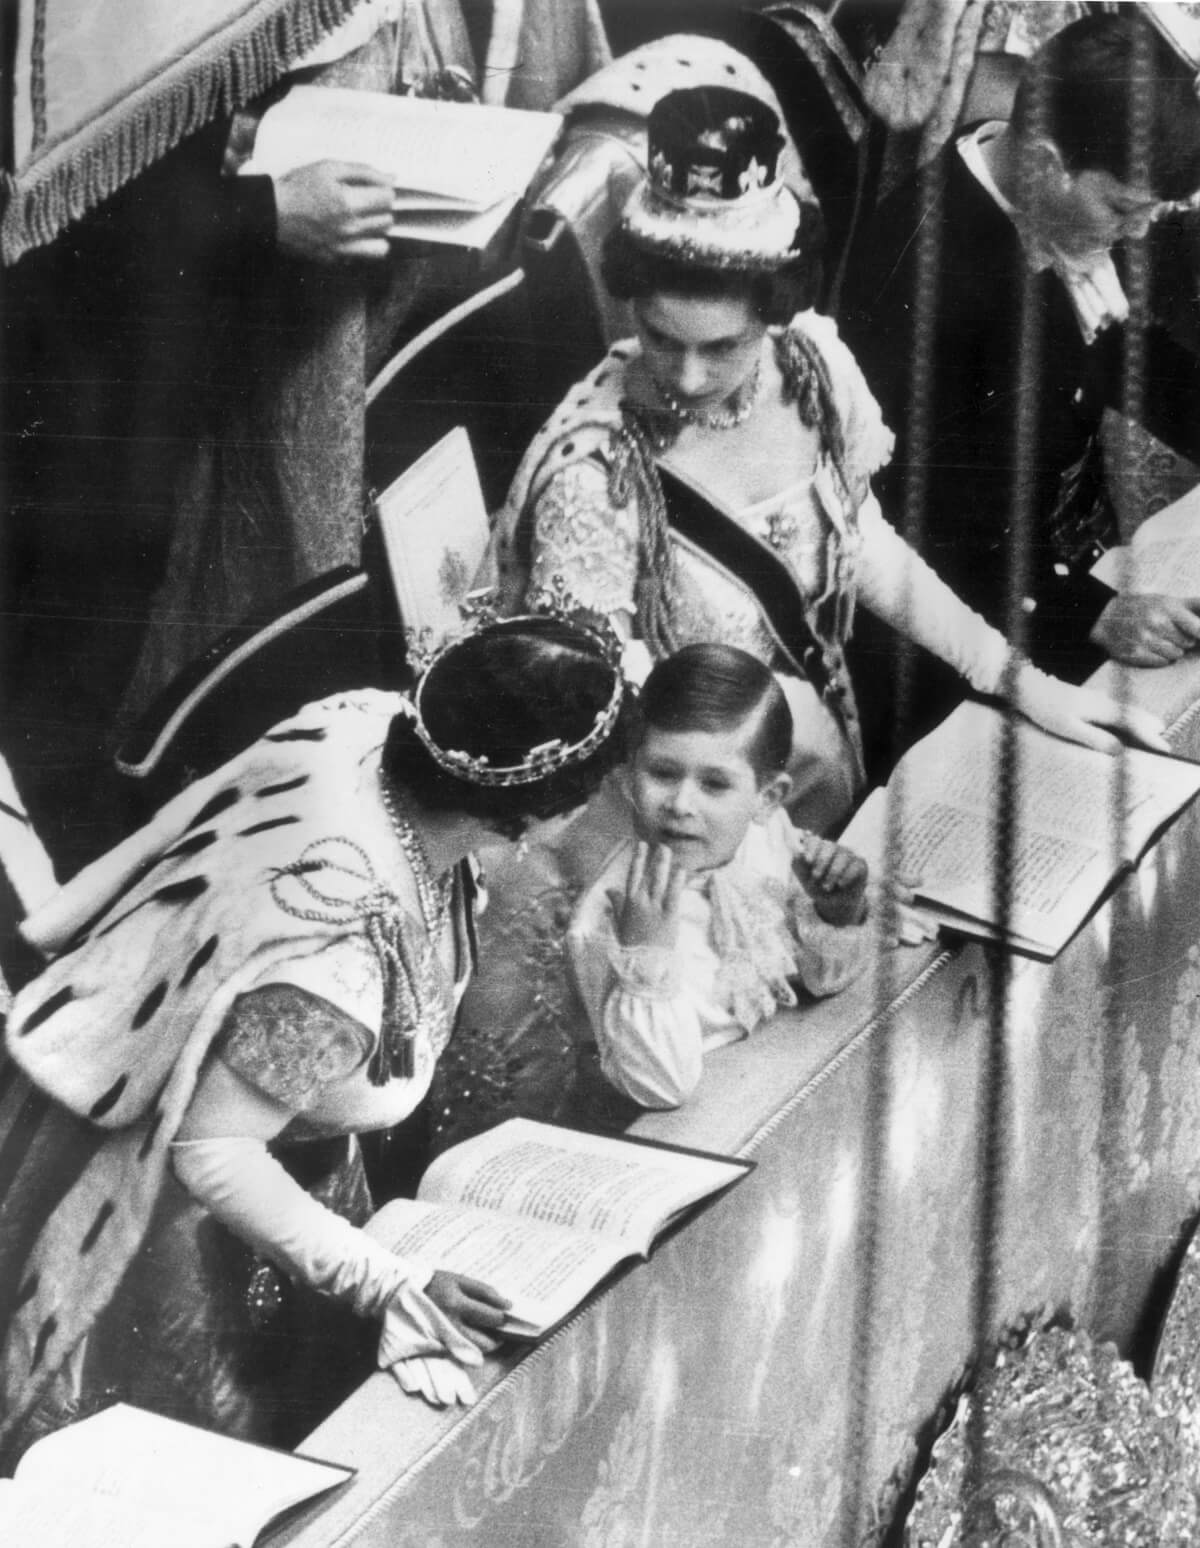 The Queen Mother talking to her grandson, then-Prince Charles, during Queen Elizabeth's coronation while Princess Margaret looks on